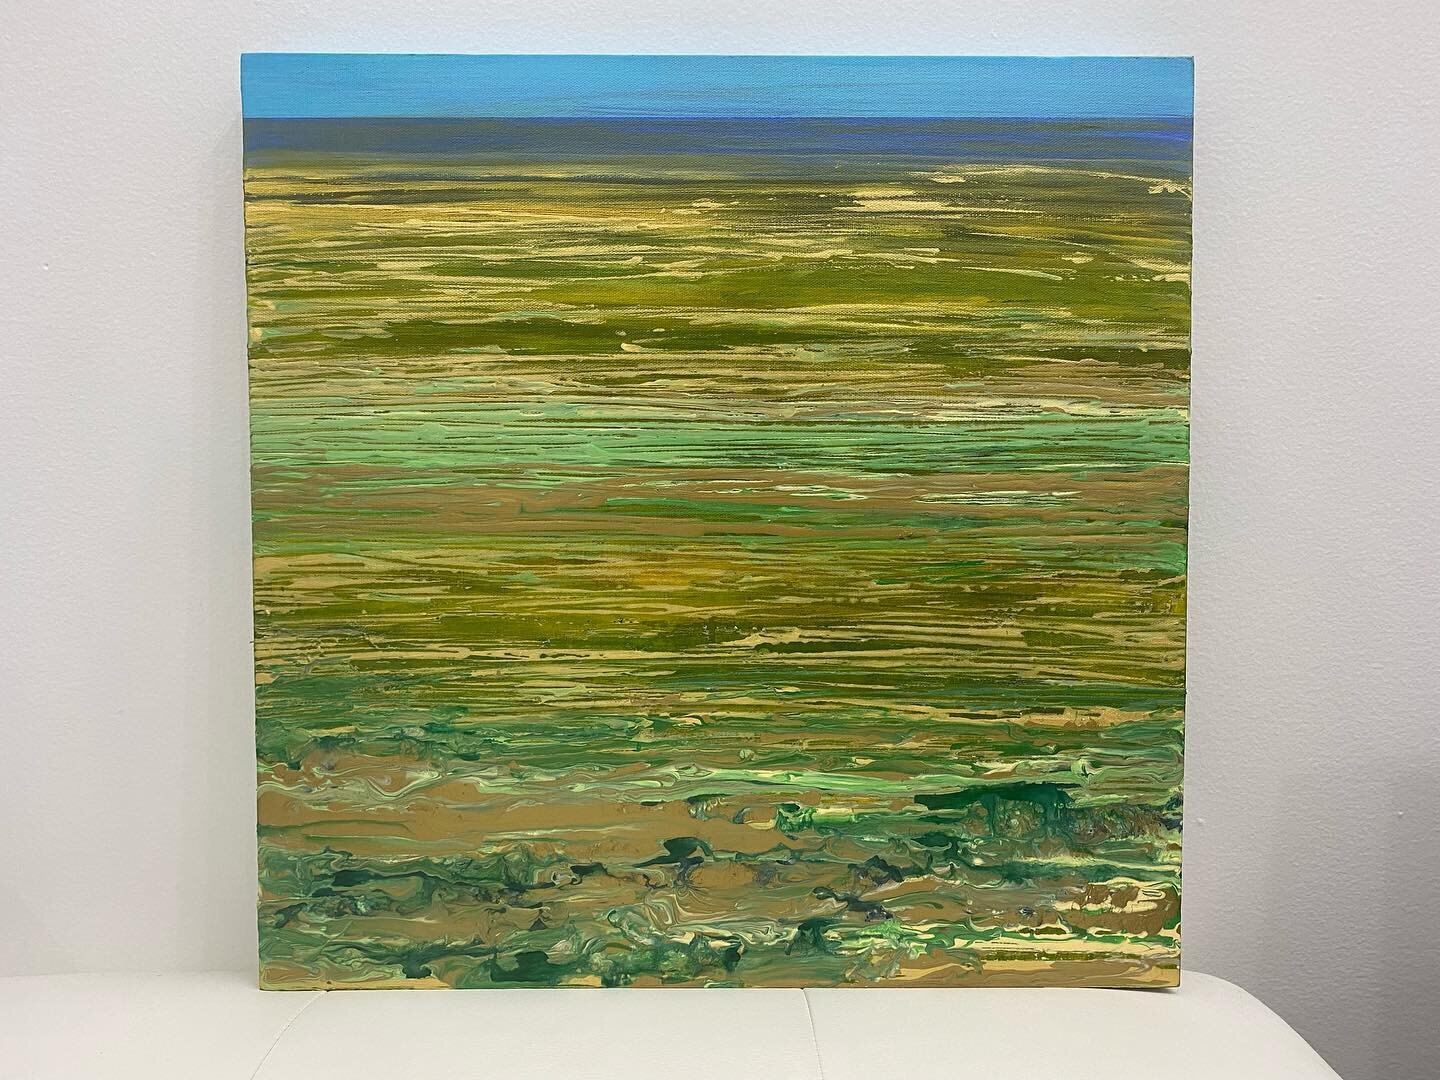 Calm, available acrylic paint on canvas, 20&rdquo;x20&rdquo; in shades of green, gold and blue.

#acrylicpainting #contemporaryart #calm #green #gold #lines #houstonart #landscape #uniqueart #originalart